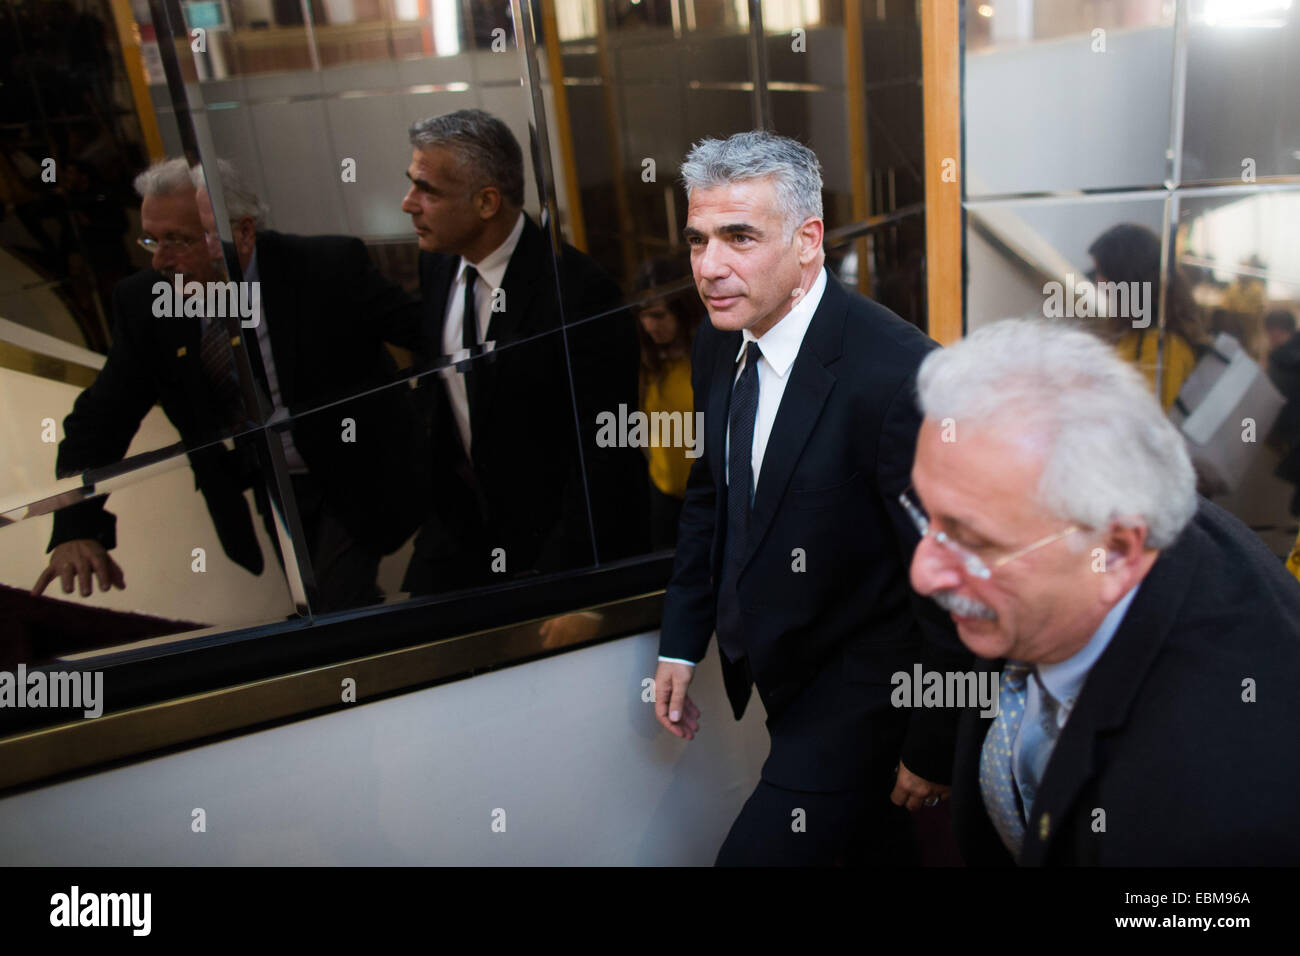 Jerusalem. 2nd Dec, 2014. Israeli Finance Minister Yair Lapid (1st L) leaves a financial conference in Jerusalem, on Dec. 2, 2014. Israeli Prime Minister Benjamin Netanyahu announced his support for dispersing the Knesset (parliament) and conducting early elections amid a coalition crisis. During a press conference at his Jerusalem office, Netanyahu also said he has ordered to fire Justice Minister Tzipi Livni and Finance Minister Yair Lapid, who he said plotted against him by outspokenly criticizing his policies. Credit:  JINI/Xinhua/Alamy Live News Stock Photo